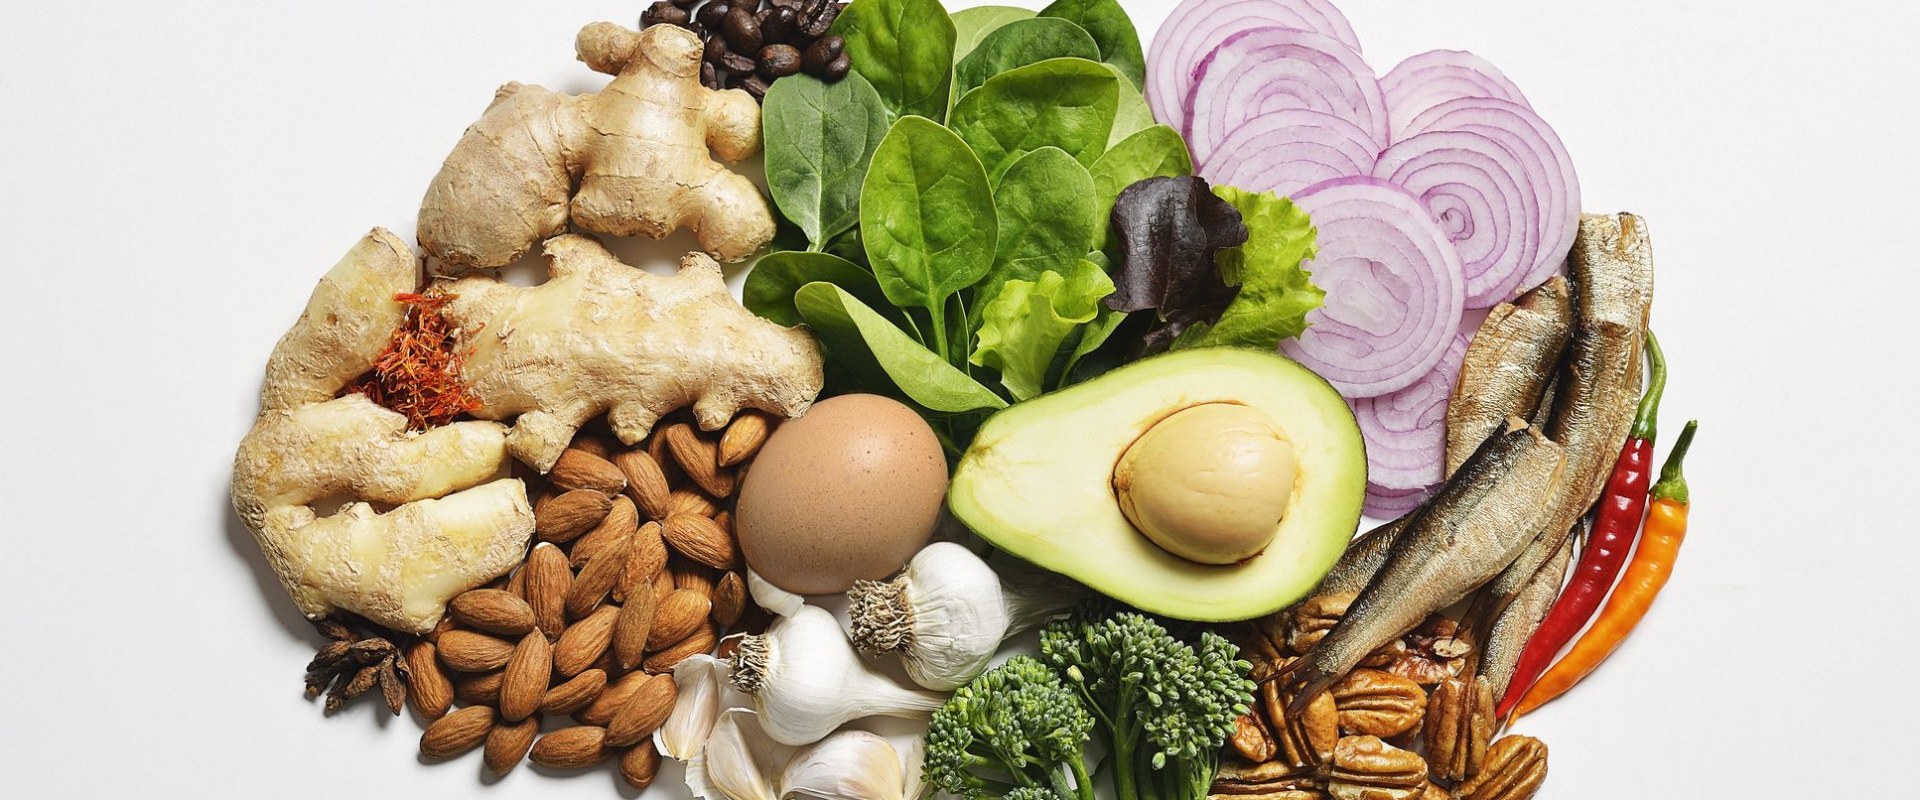 Healthy Diet and Nutrition for Alzheimer's Prevention